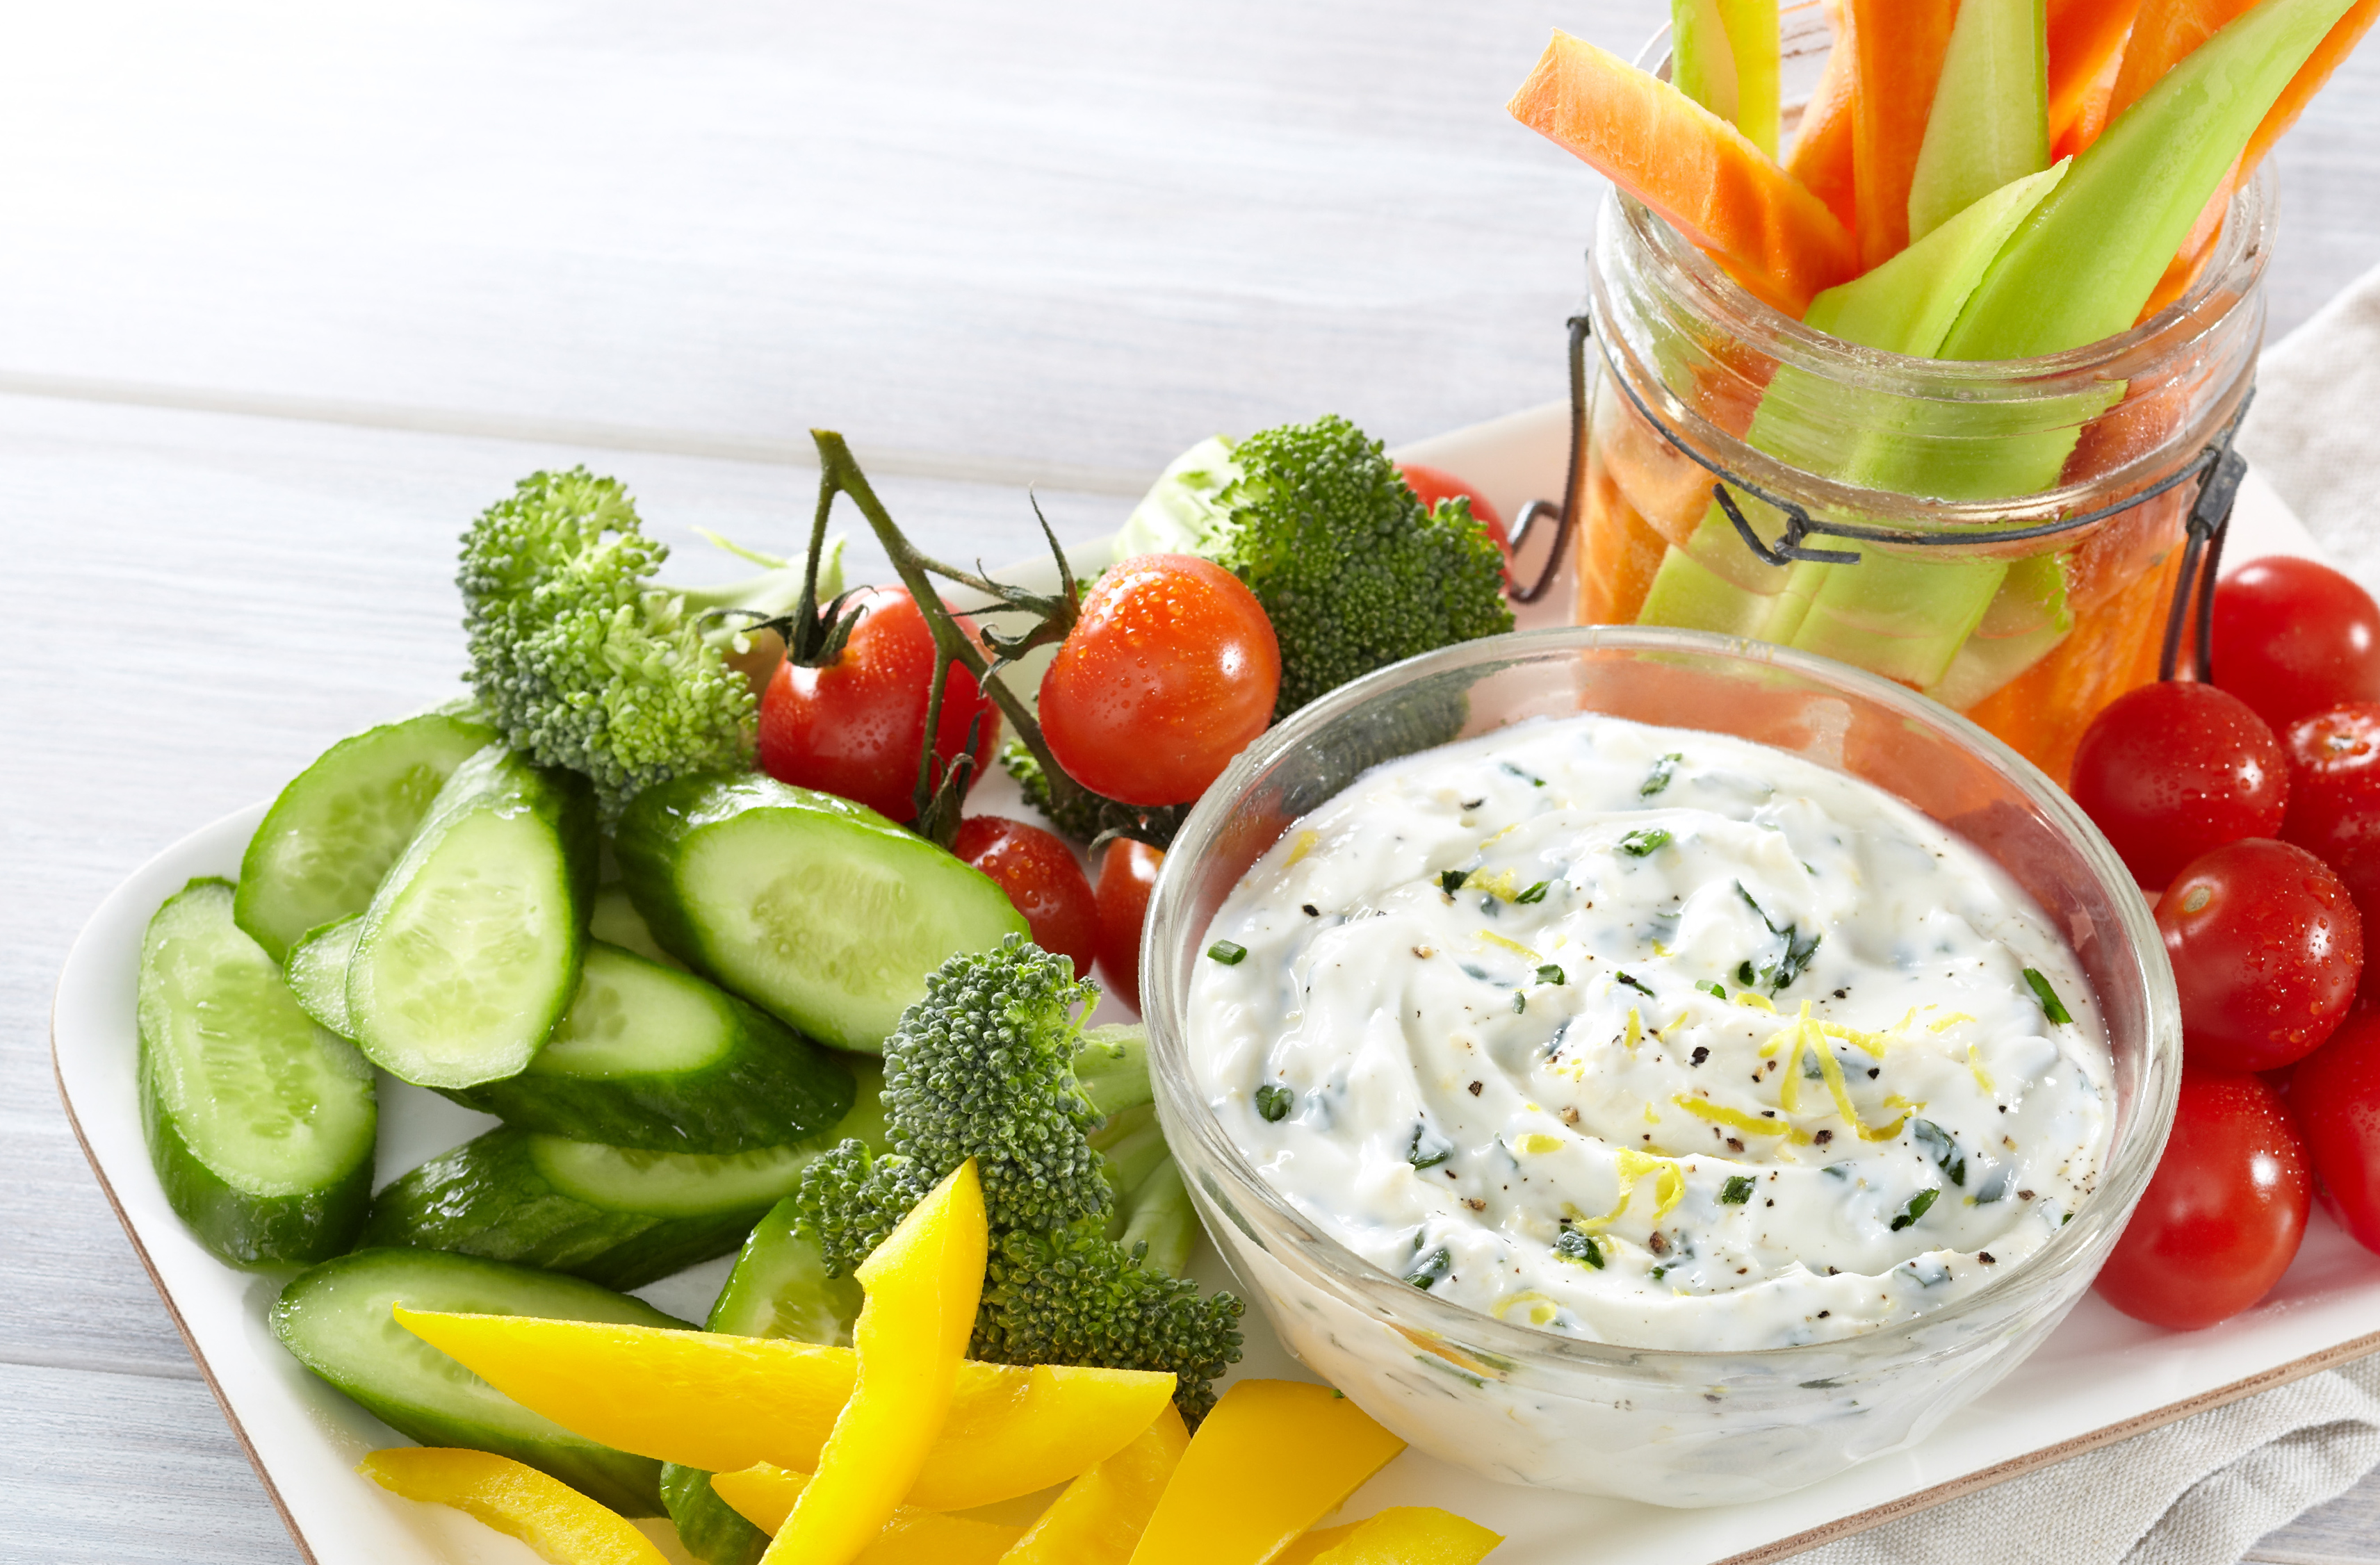 A large platter with vegetables and a bowl Lemon Chive Yogurt Dip